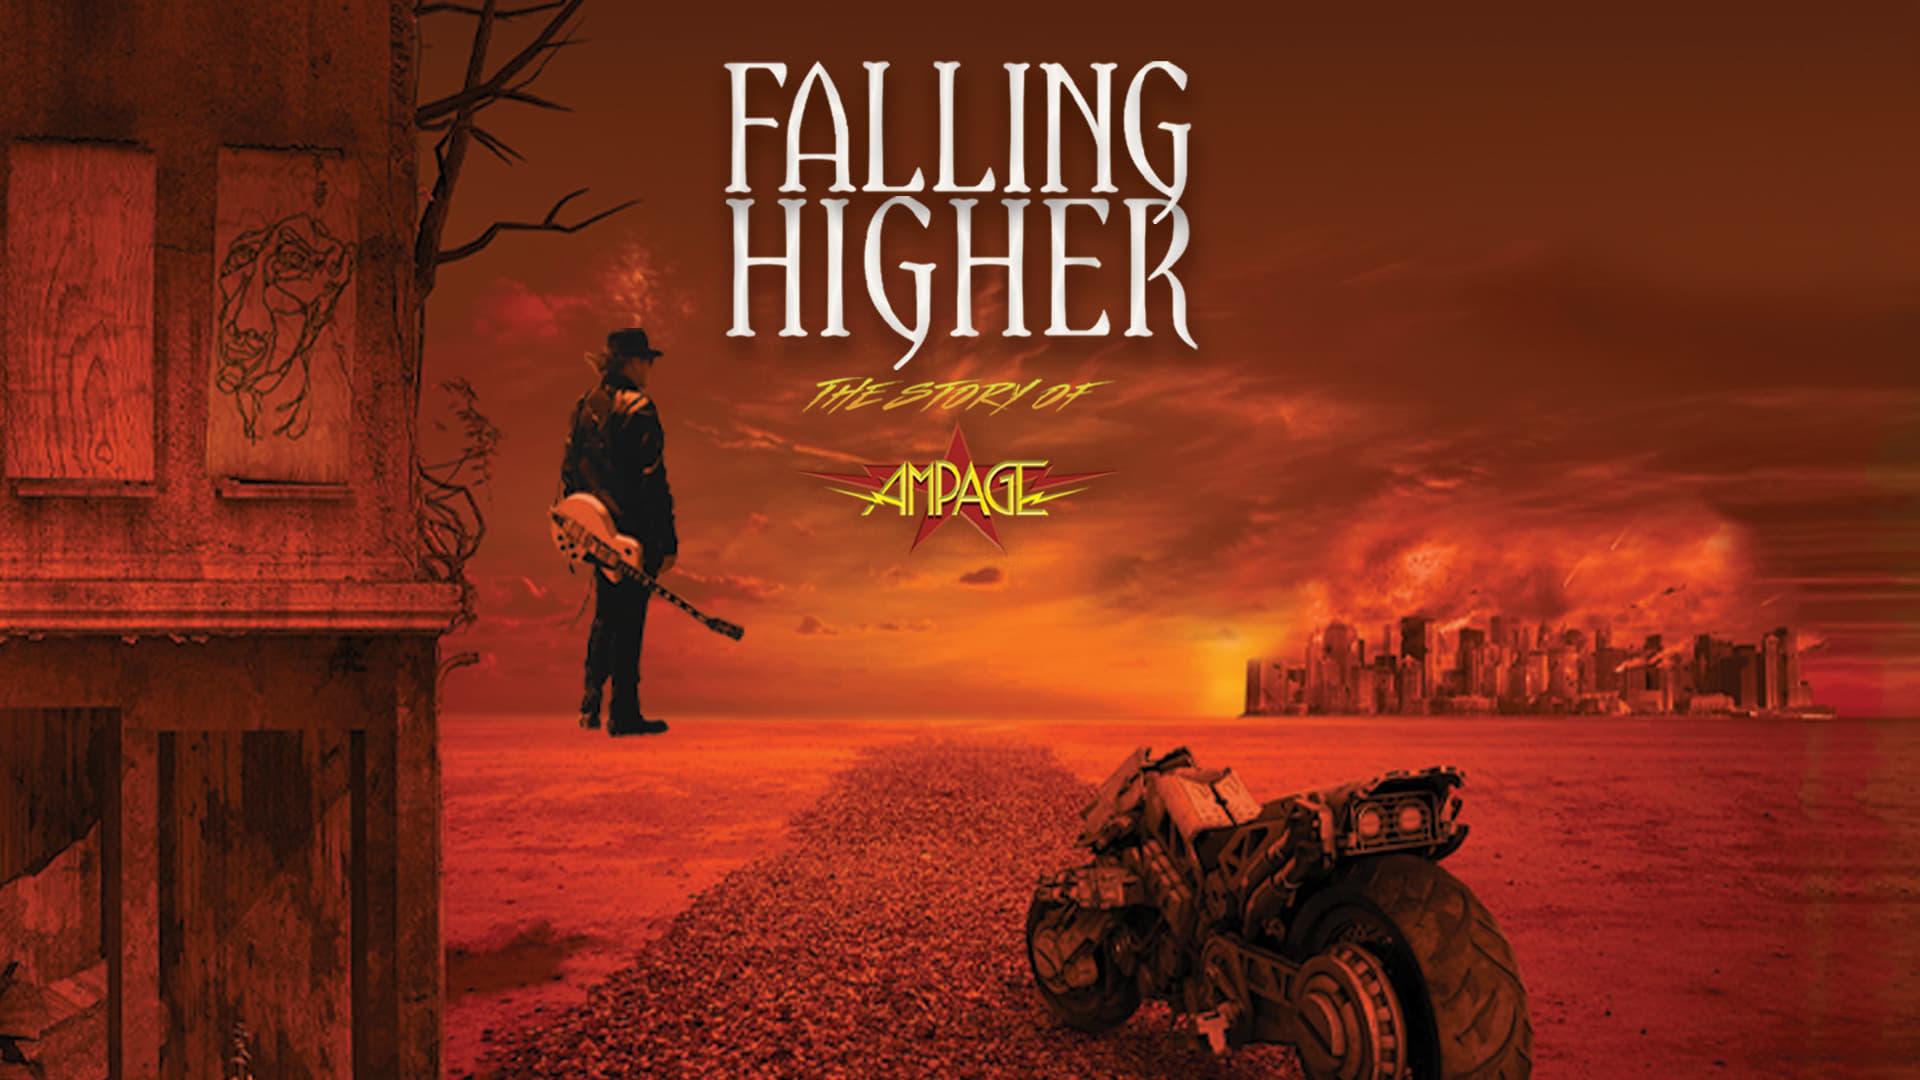 Falling Higher: The Story Of Ampage backdrop